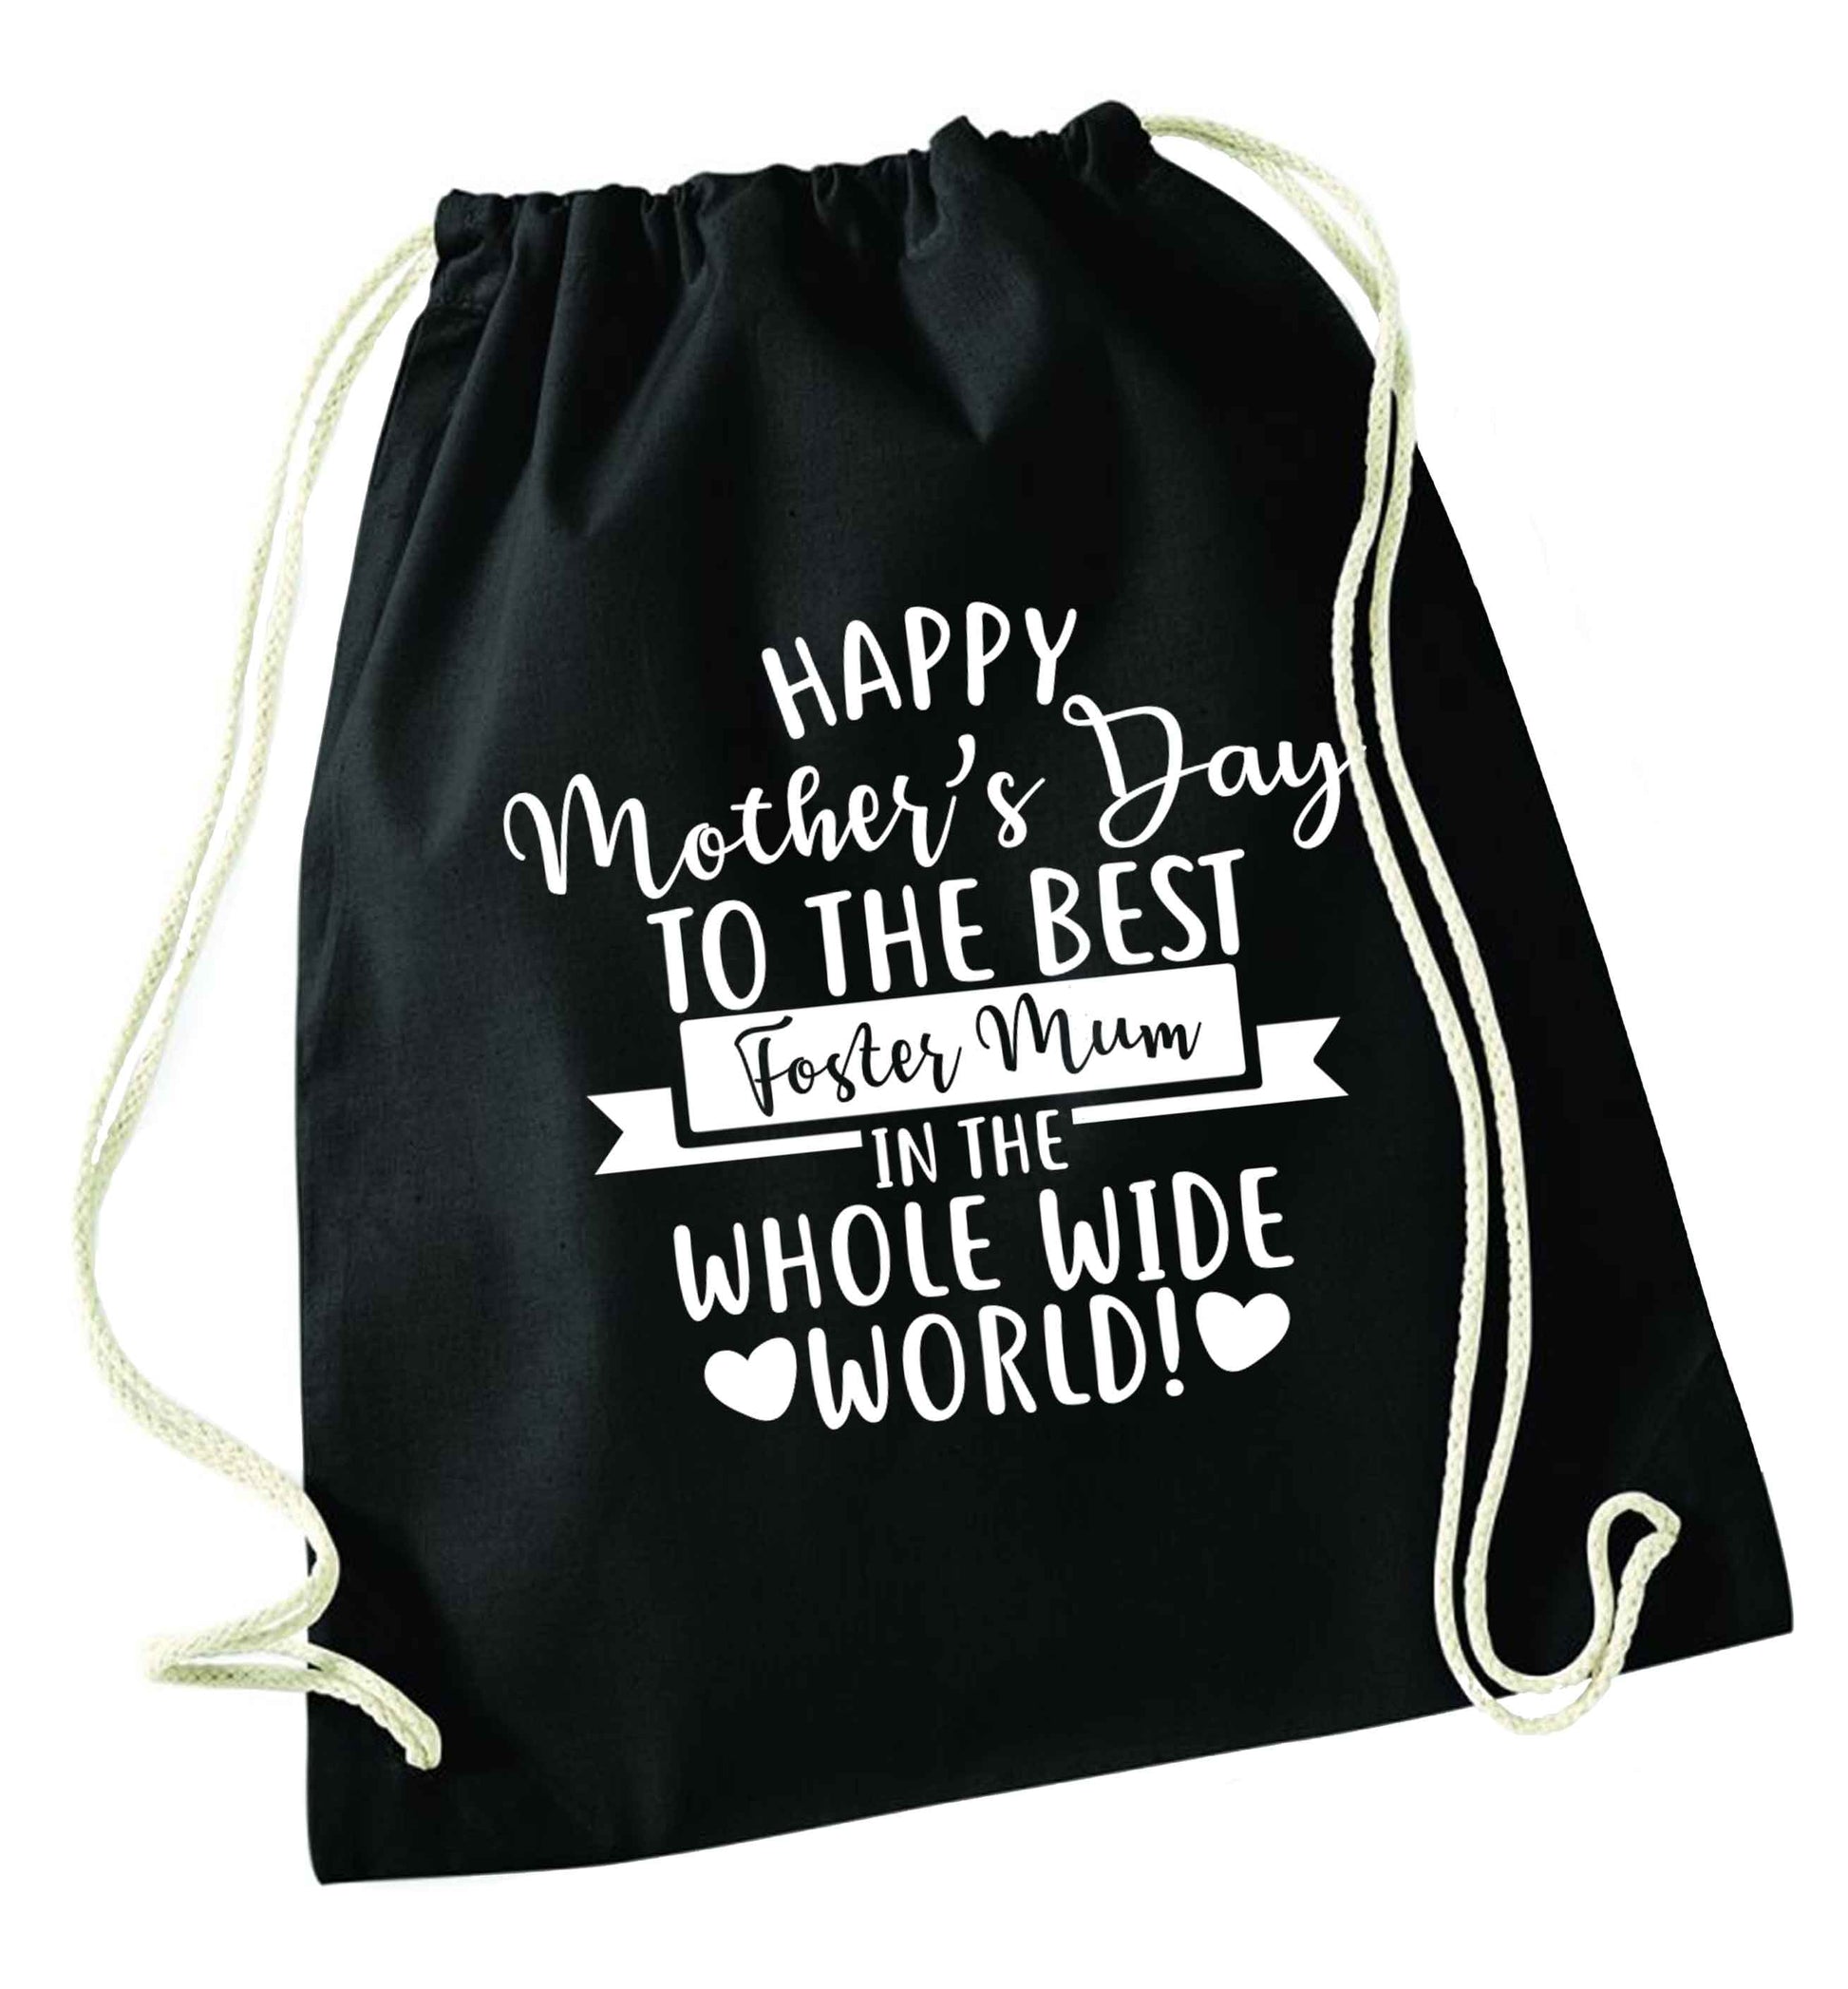 Happy mother's day to the best foster mum in the world black drawstring bag